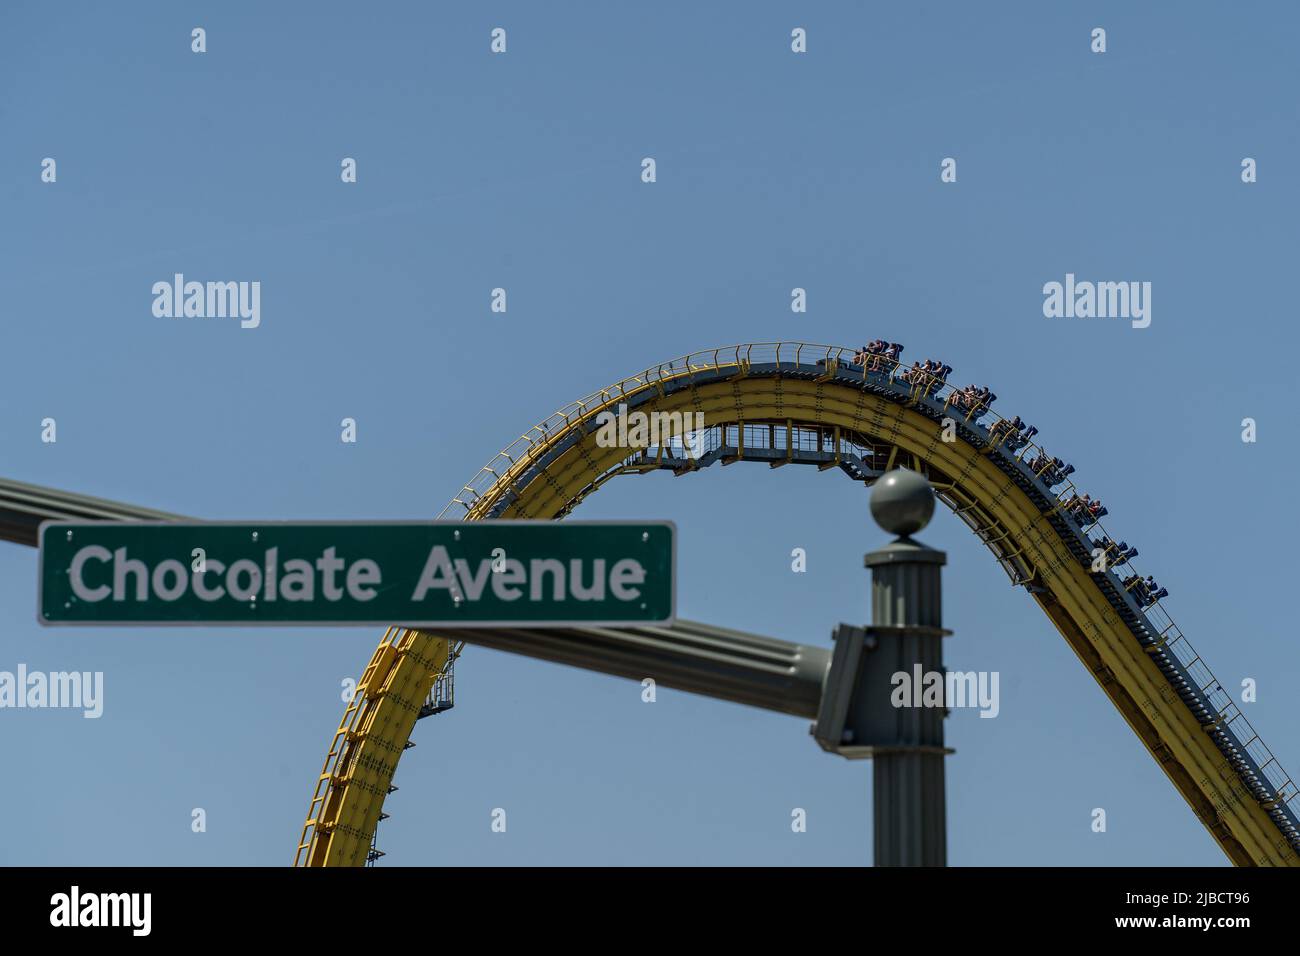 Hershey Pennsylvania, May 30, 2022: Chocolate Avenue street sign with Hersheypark roller coaster in the background. Stock Photo